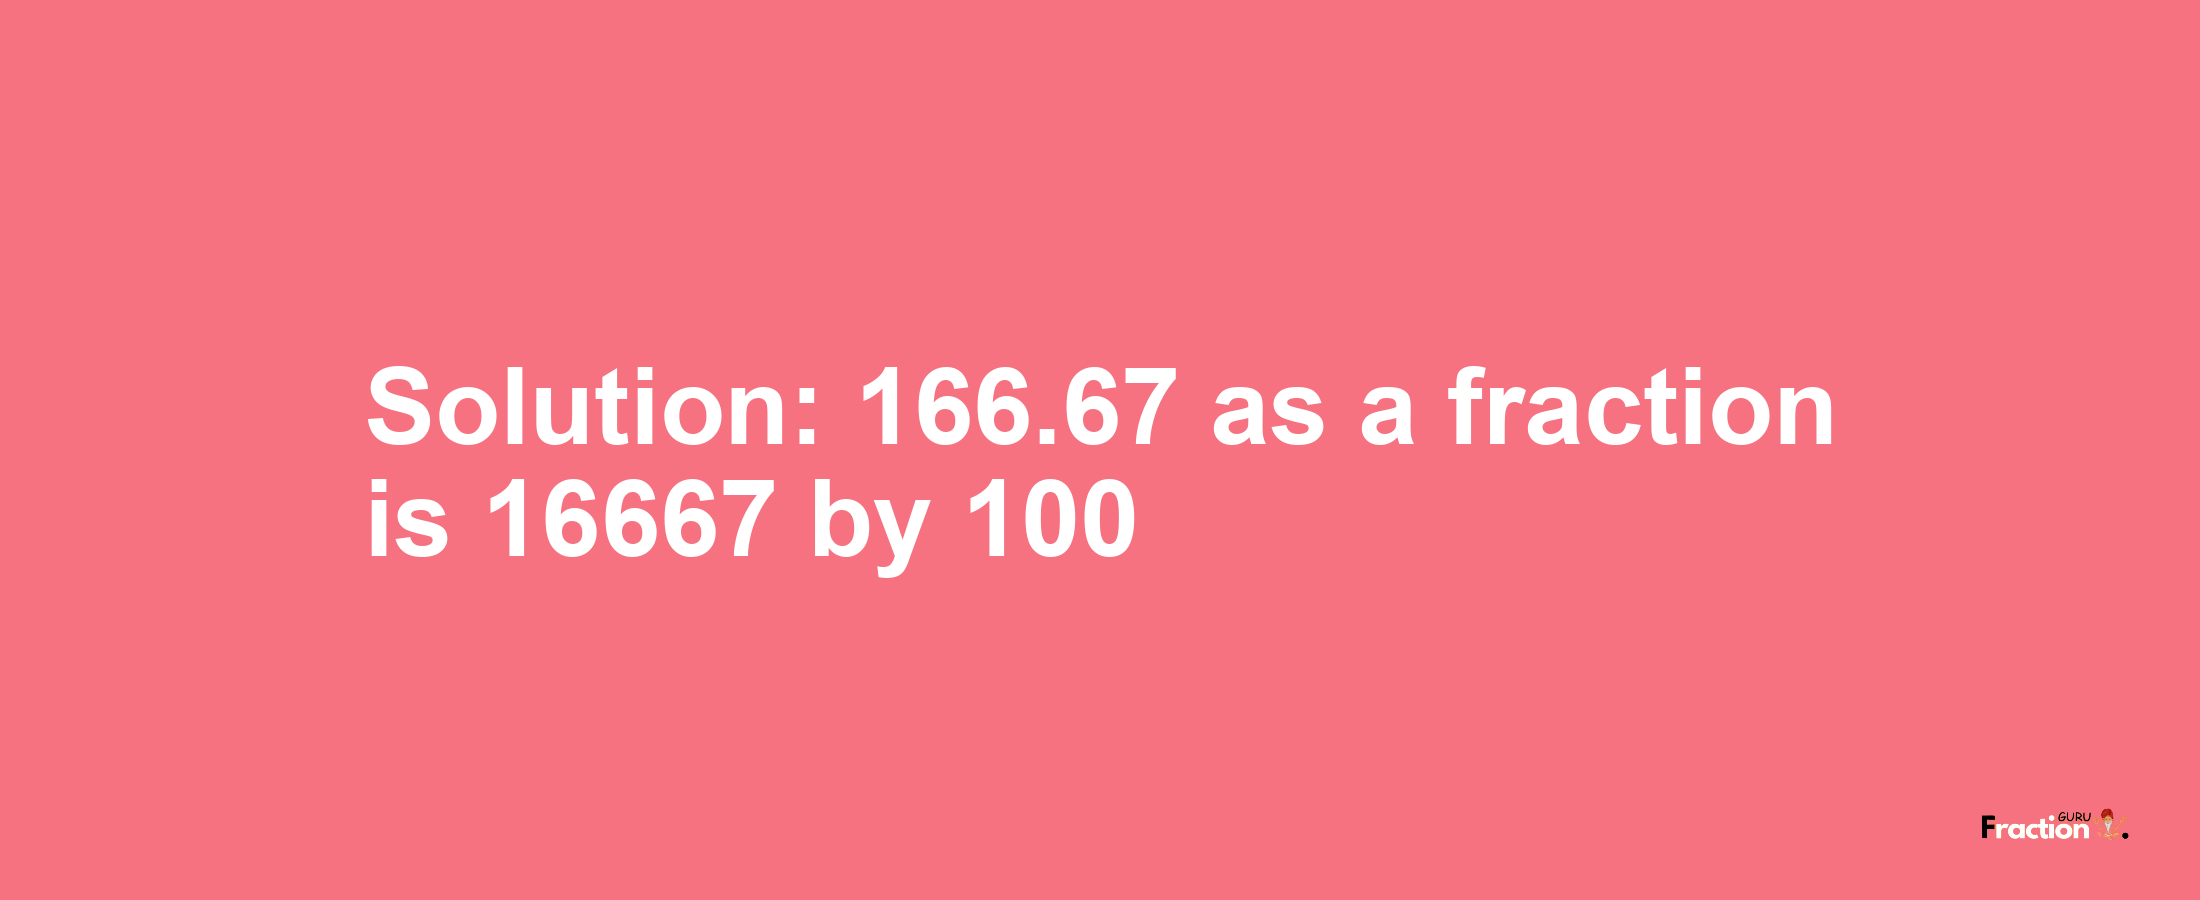 Solution:166.67 as a fraction is 16667/100